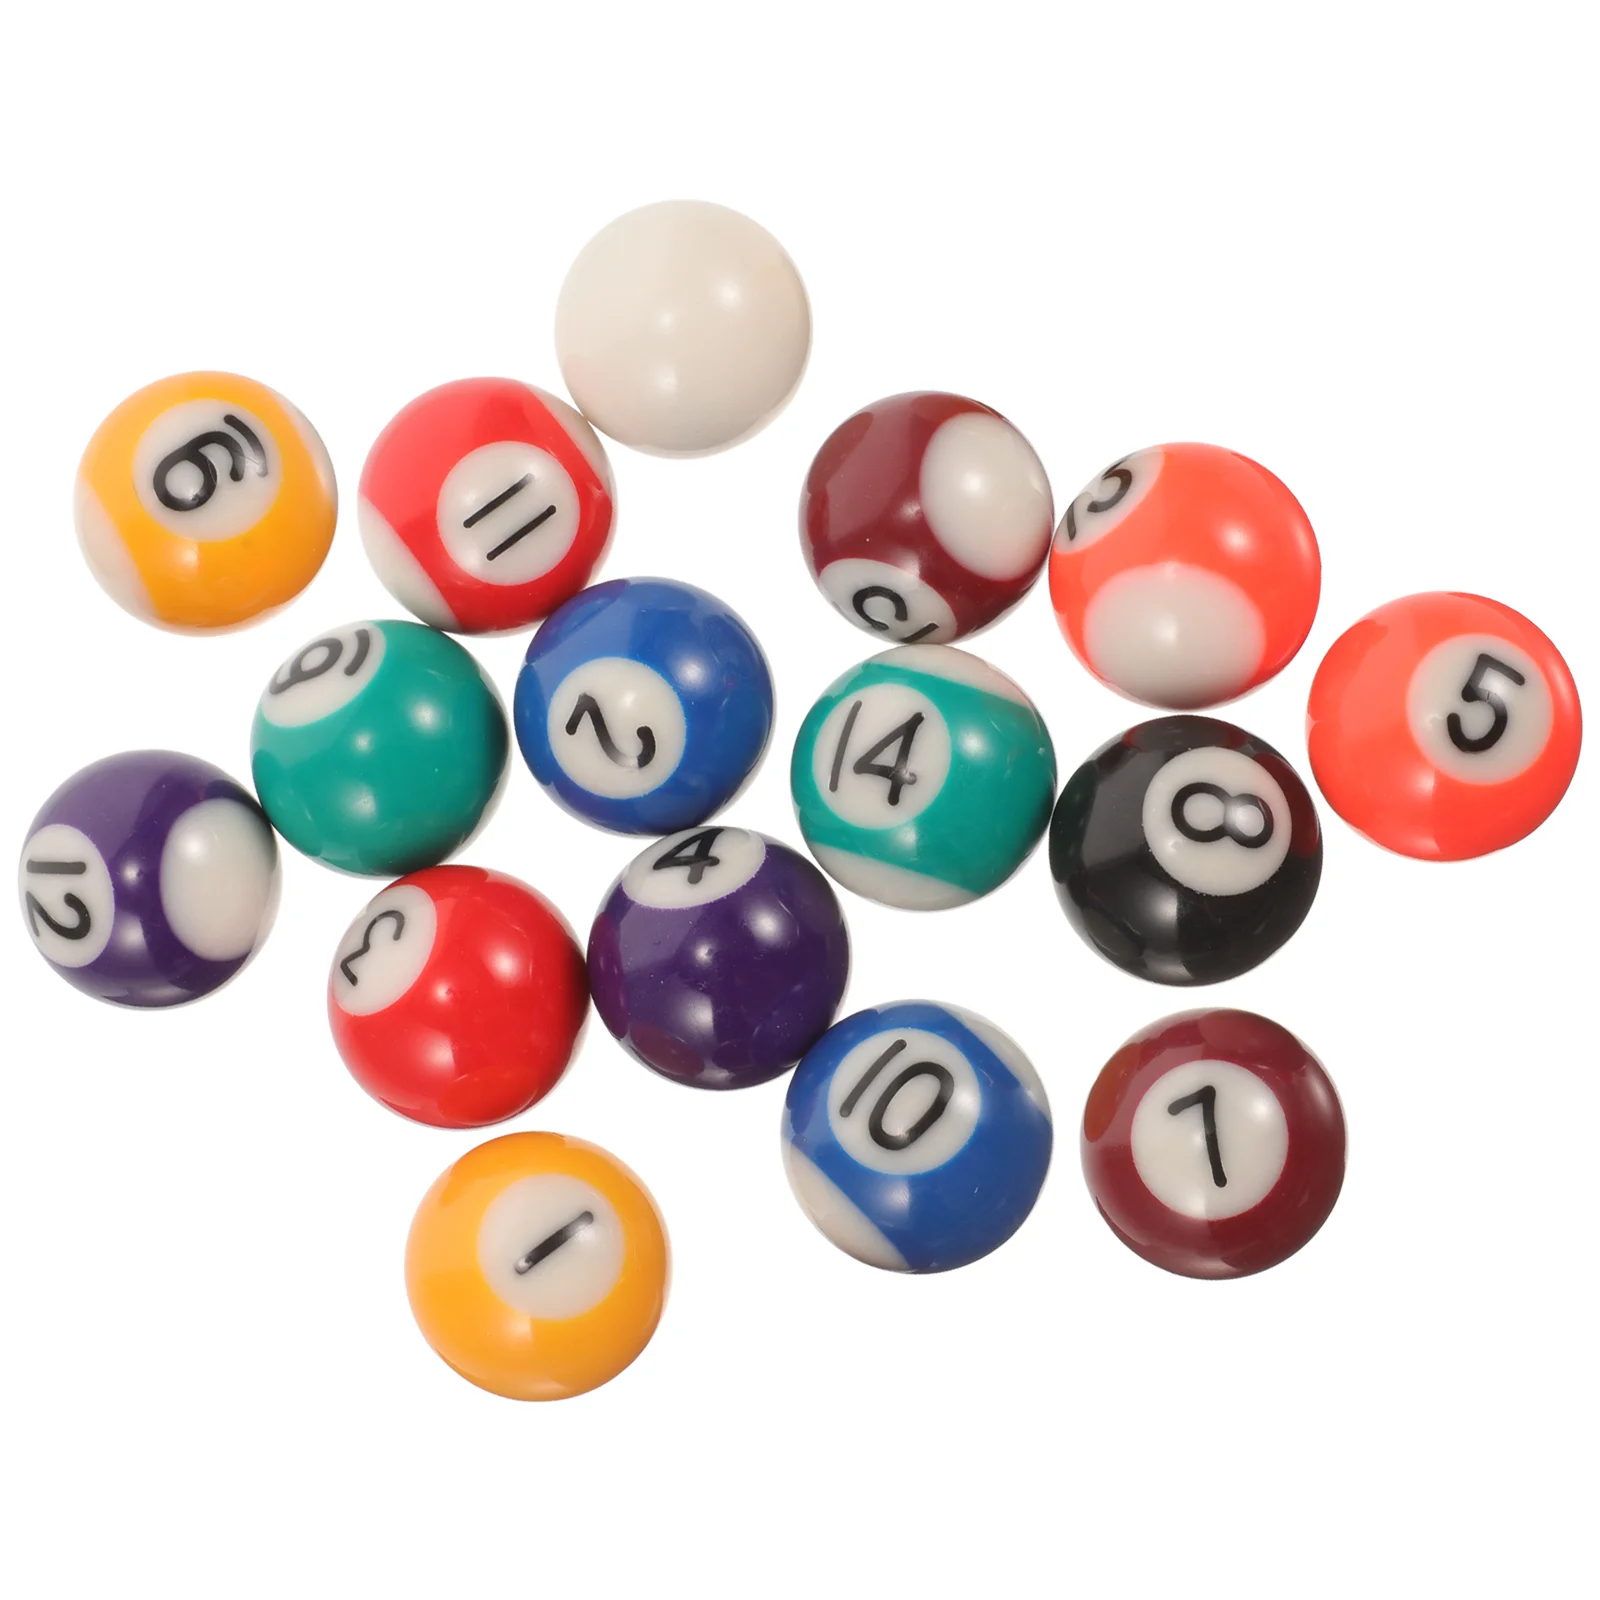 billiard cue ball pool stick accessory replace replaceable white pool table set up balls resin equipment wear resistant mixed 1 Set of Miniature Billiard Ball Toys Replaceable Billiard Ball Toys Resin Pool Balls Billiard Necessity